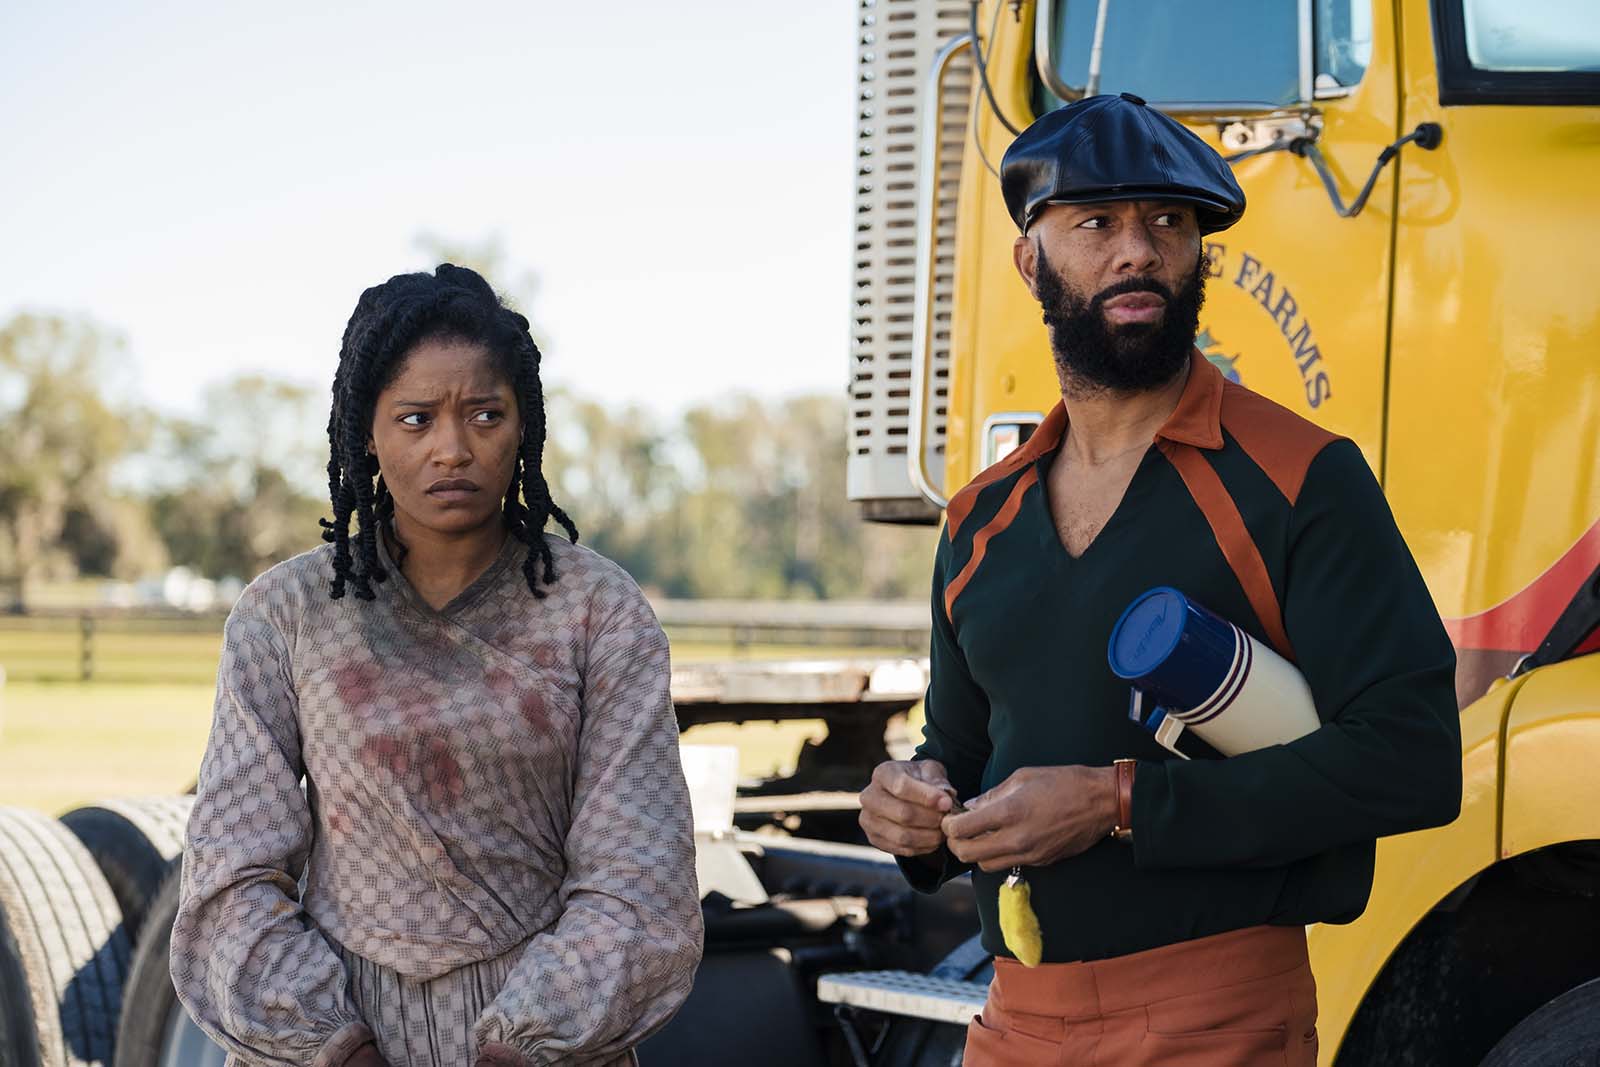 Alice is a slave woman who escapes a plantation only to discover that it’s 1973. Image © Vertical Entertainment/Roadside Attractions. Photo credit: Kyle Kaplan